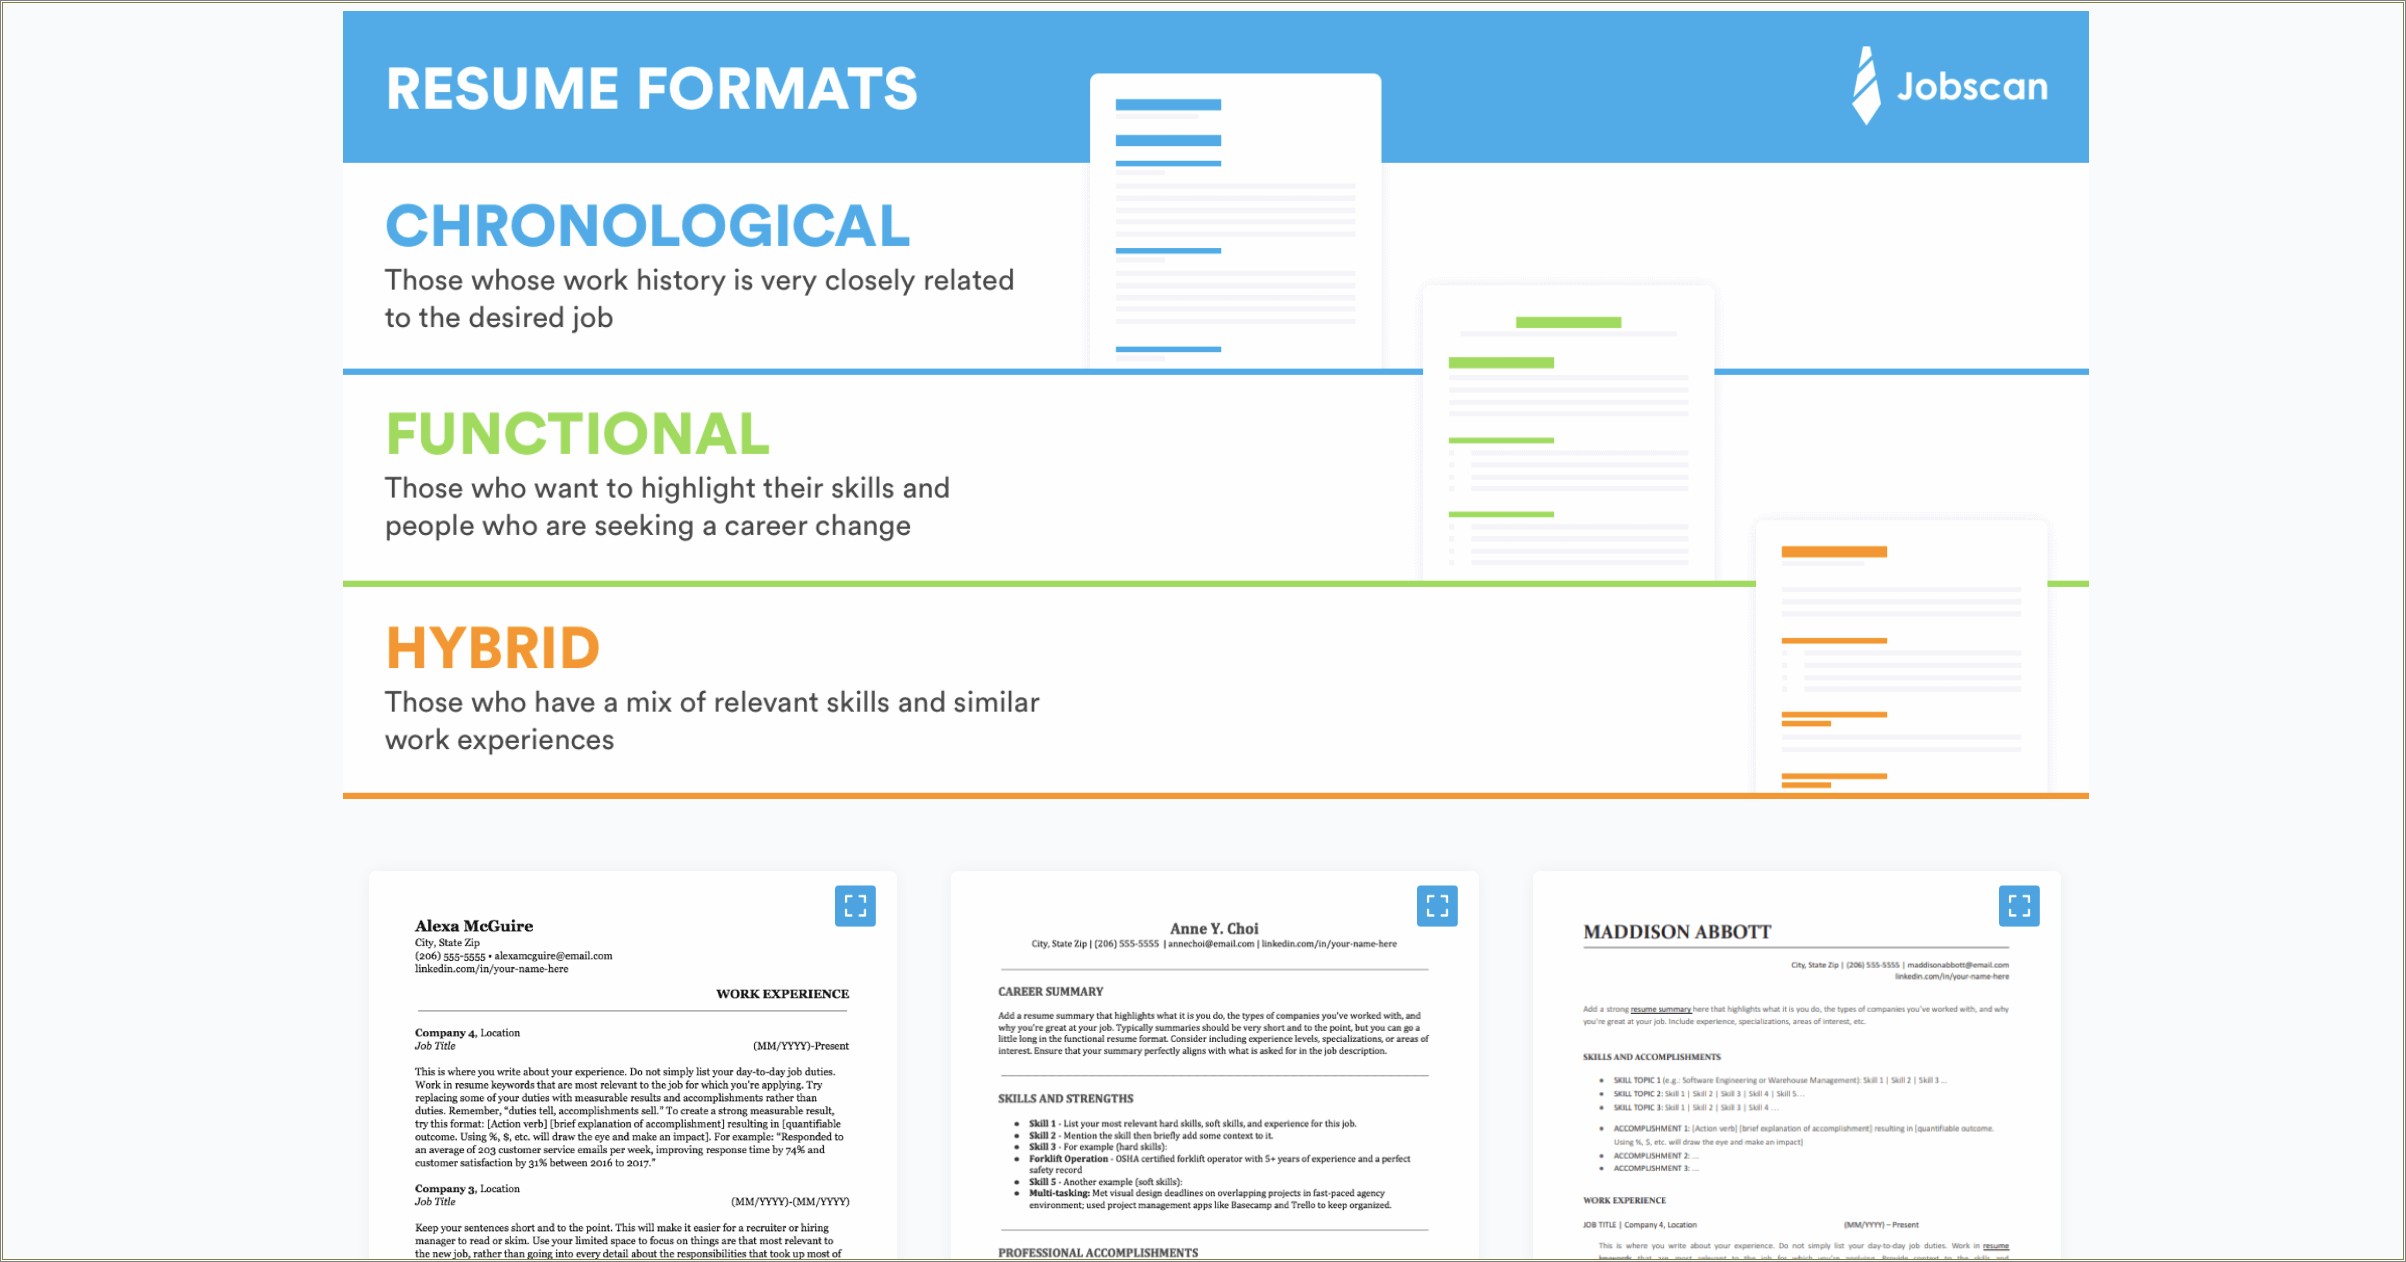 Resume Styles That Emphasize Skills Over Experience